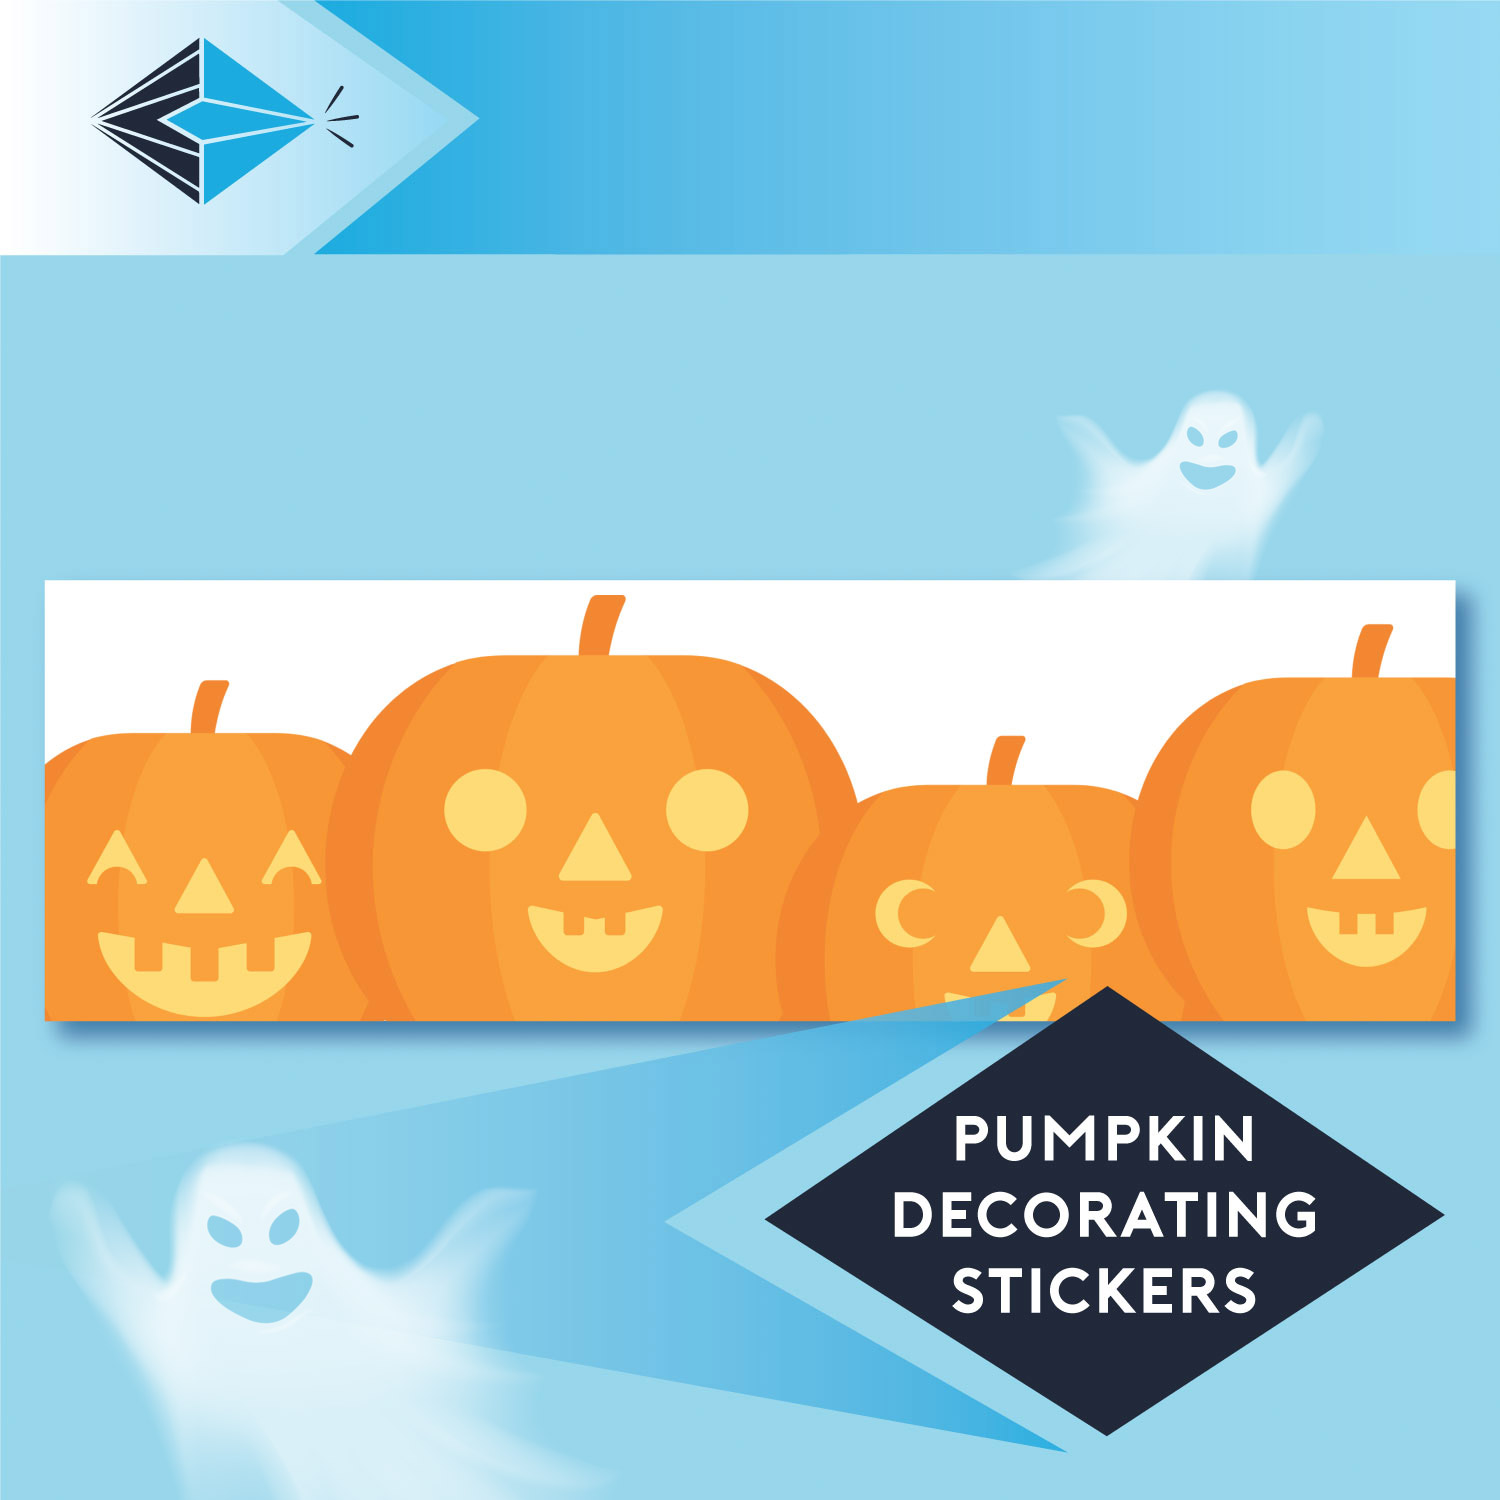 Windows Stickers for Halloween Pumpkin Themed Stickers Clear Vinyl Stickers Stockport Manchester UK